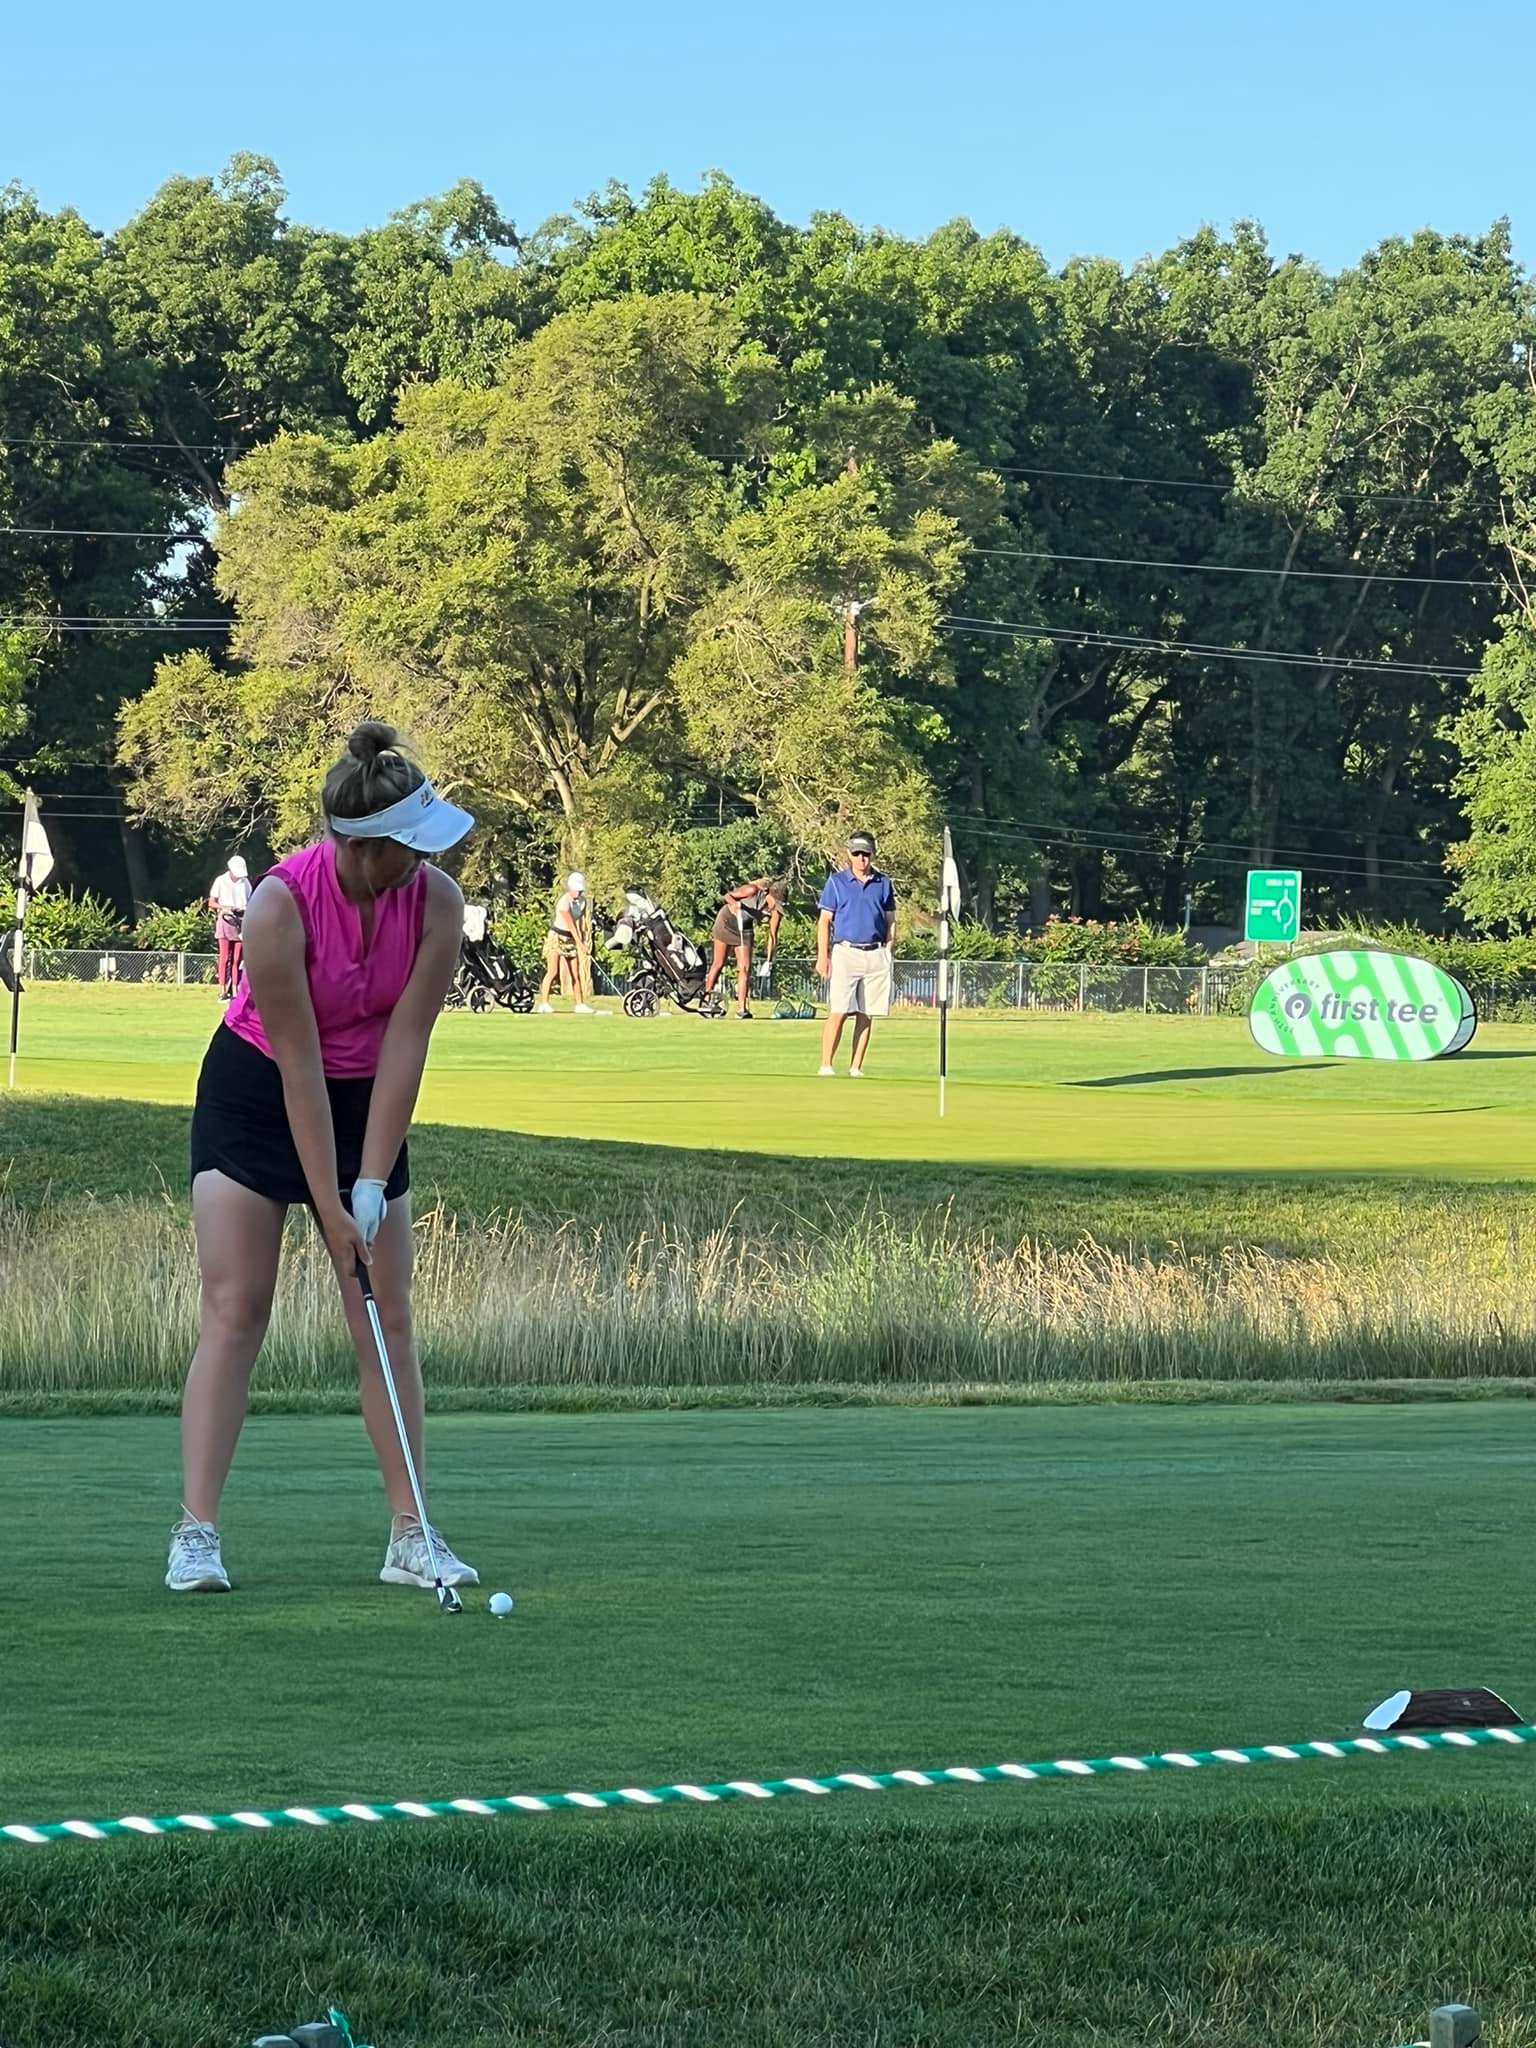 Reese Jansa of First Tee South Dakota to Compete in First Tee’s